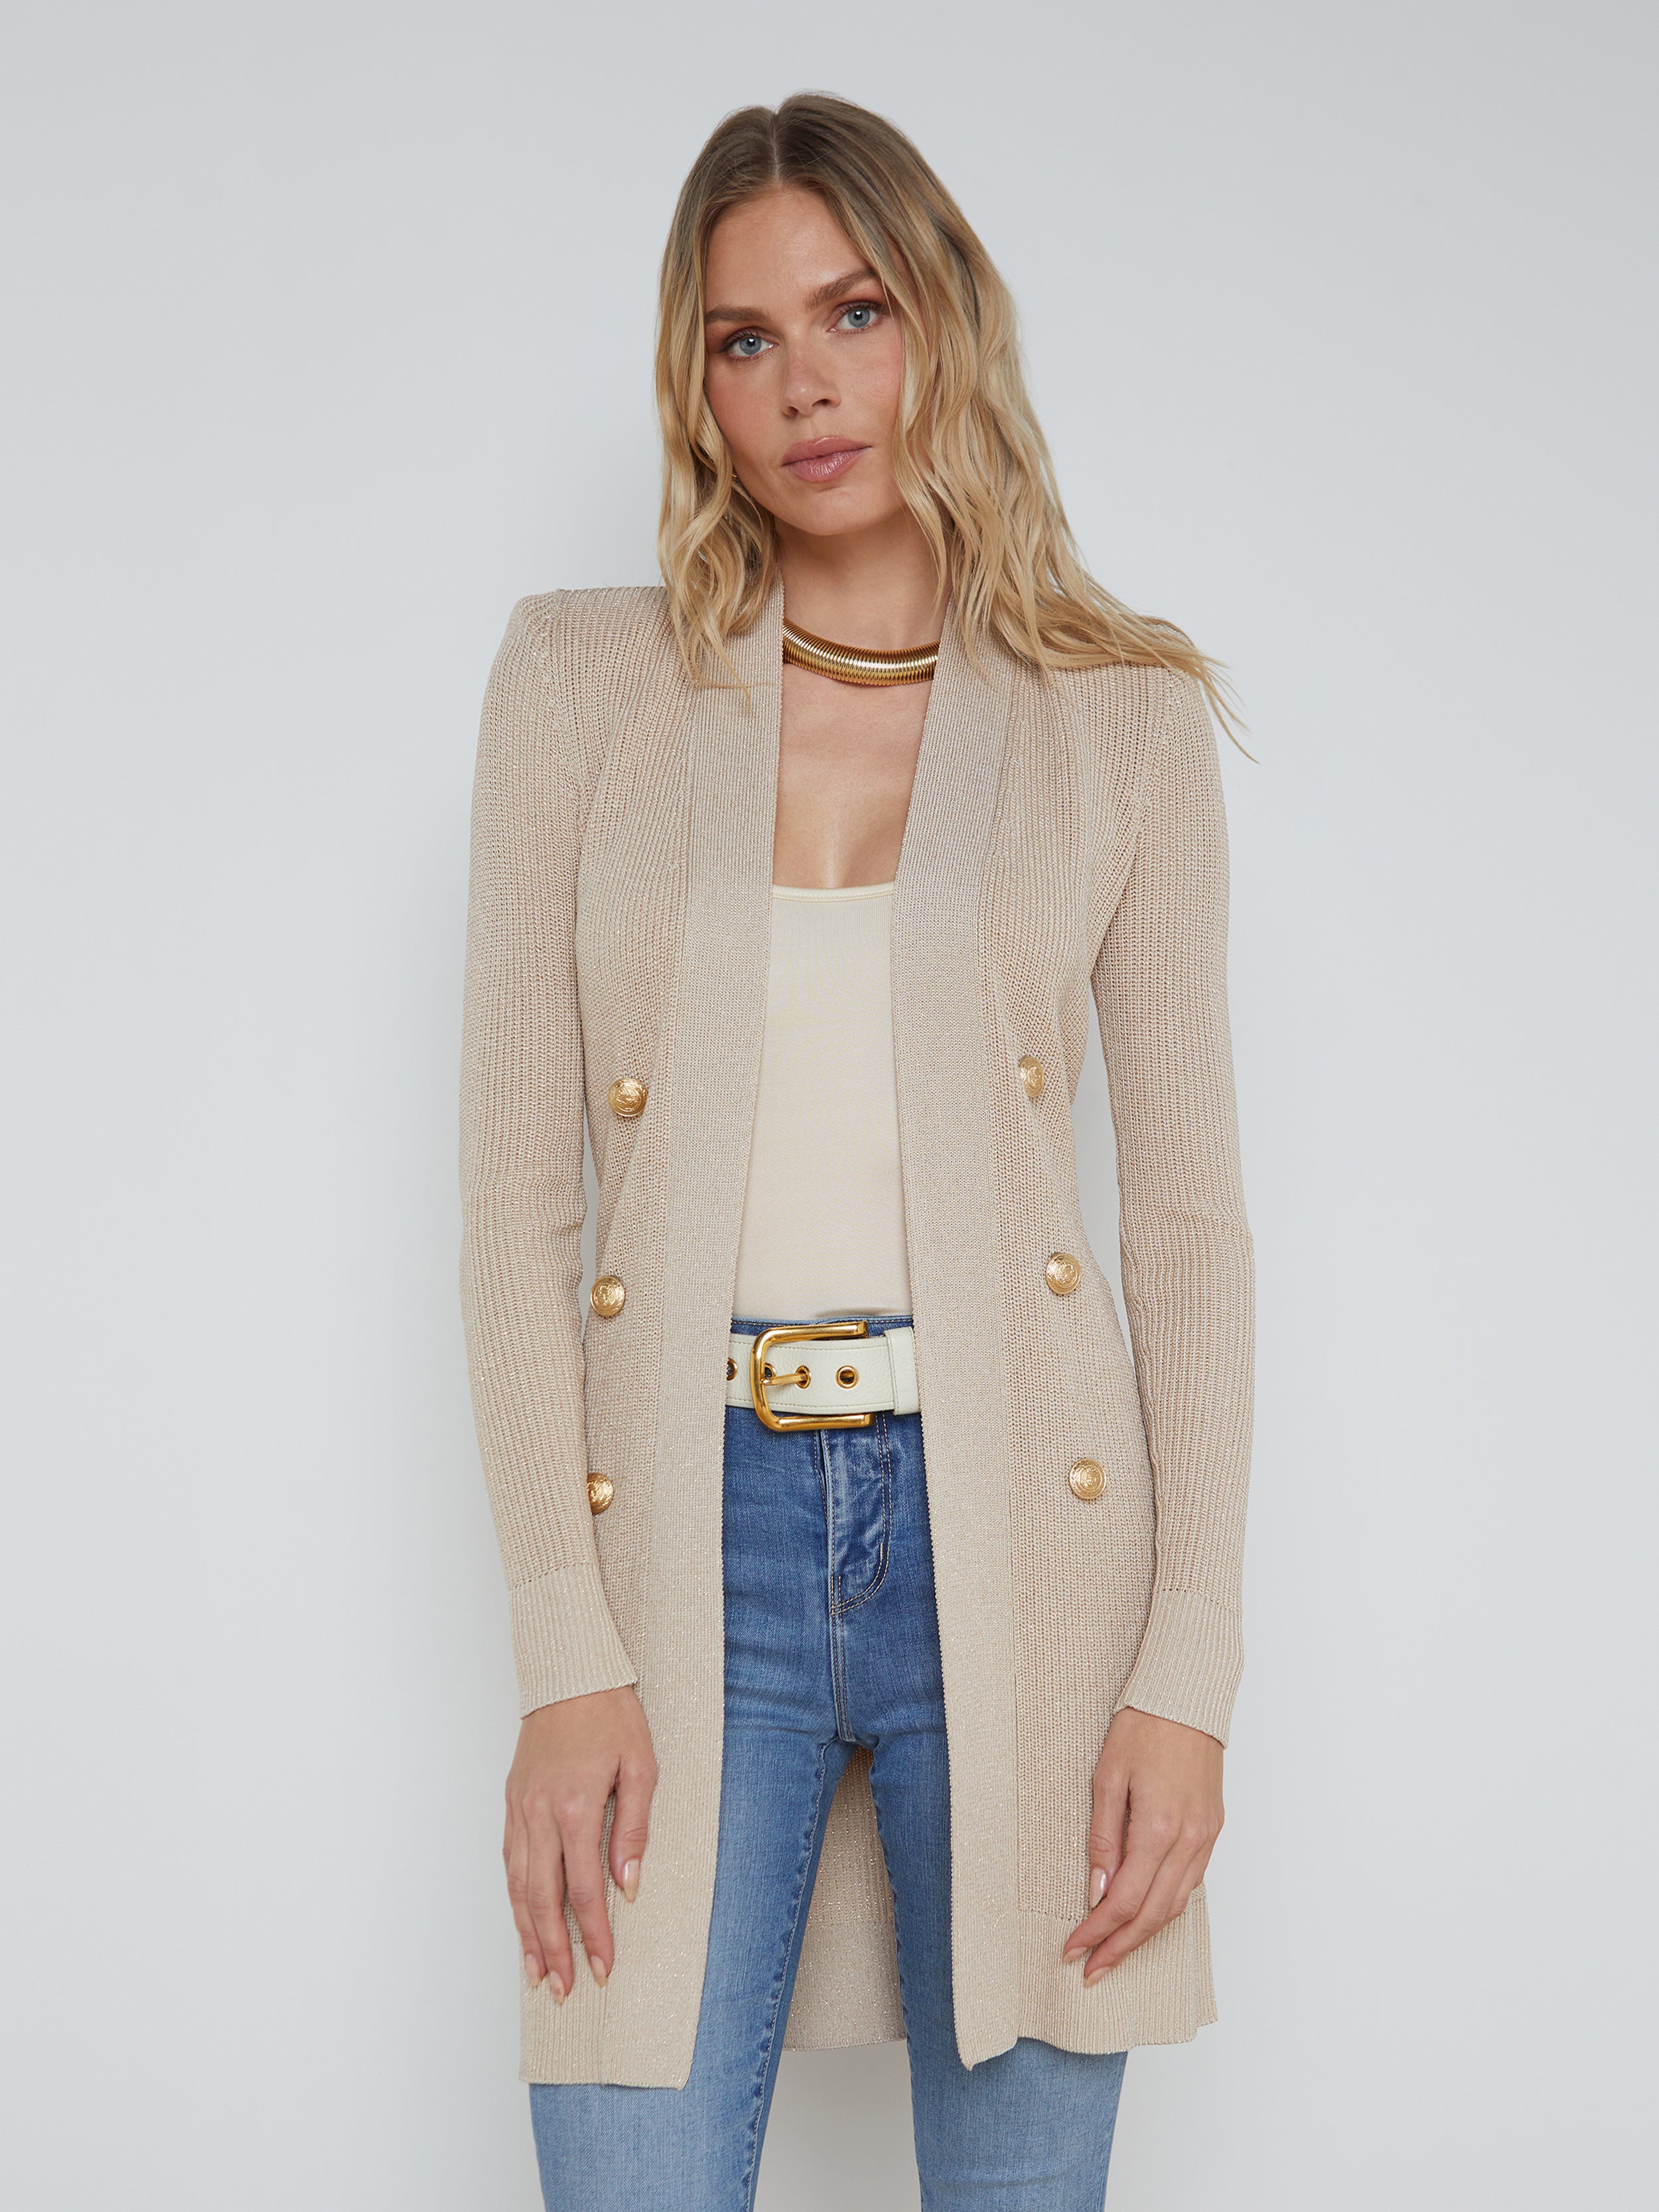 Featured: Noe Double-Breasted Cardigan